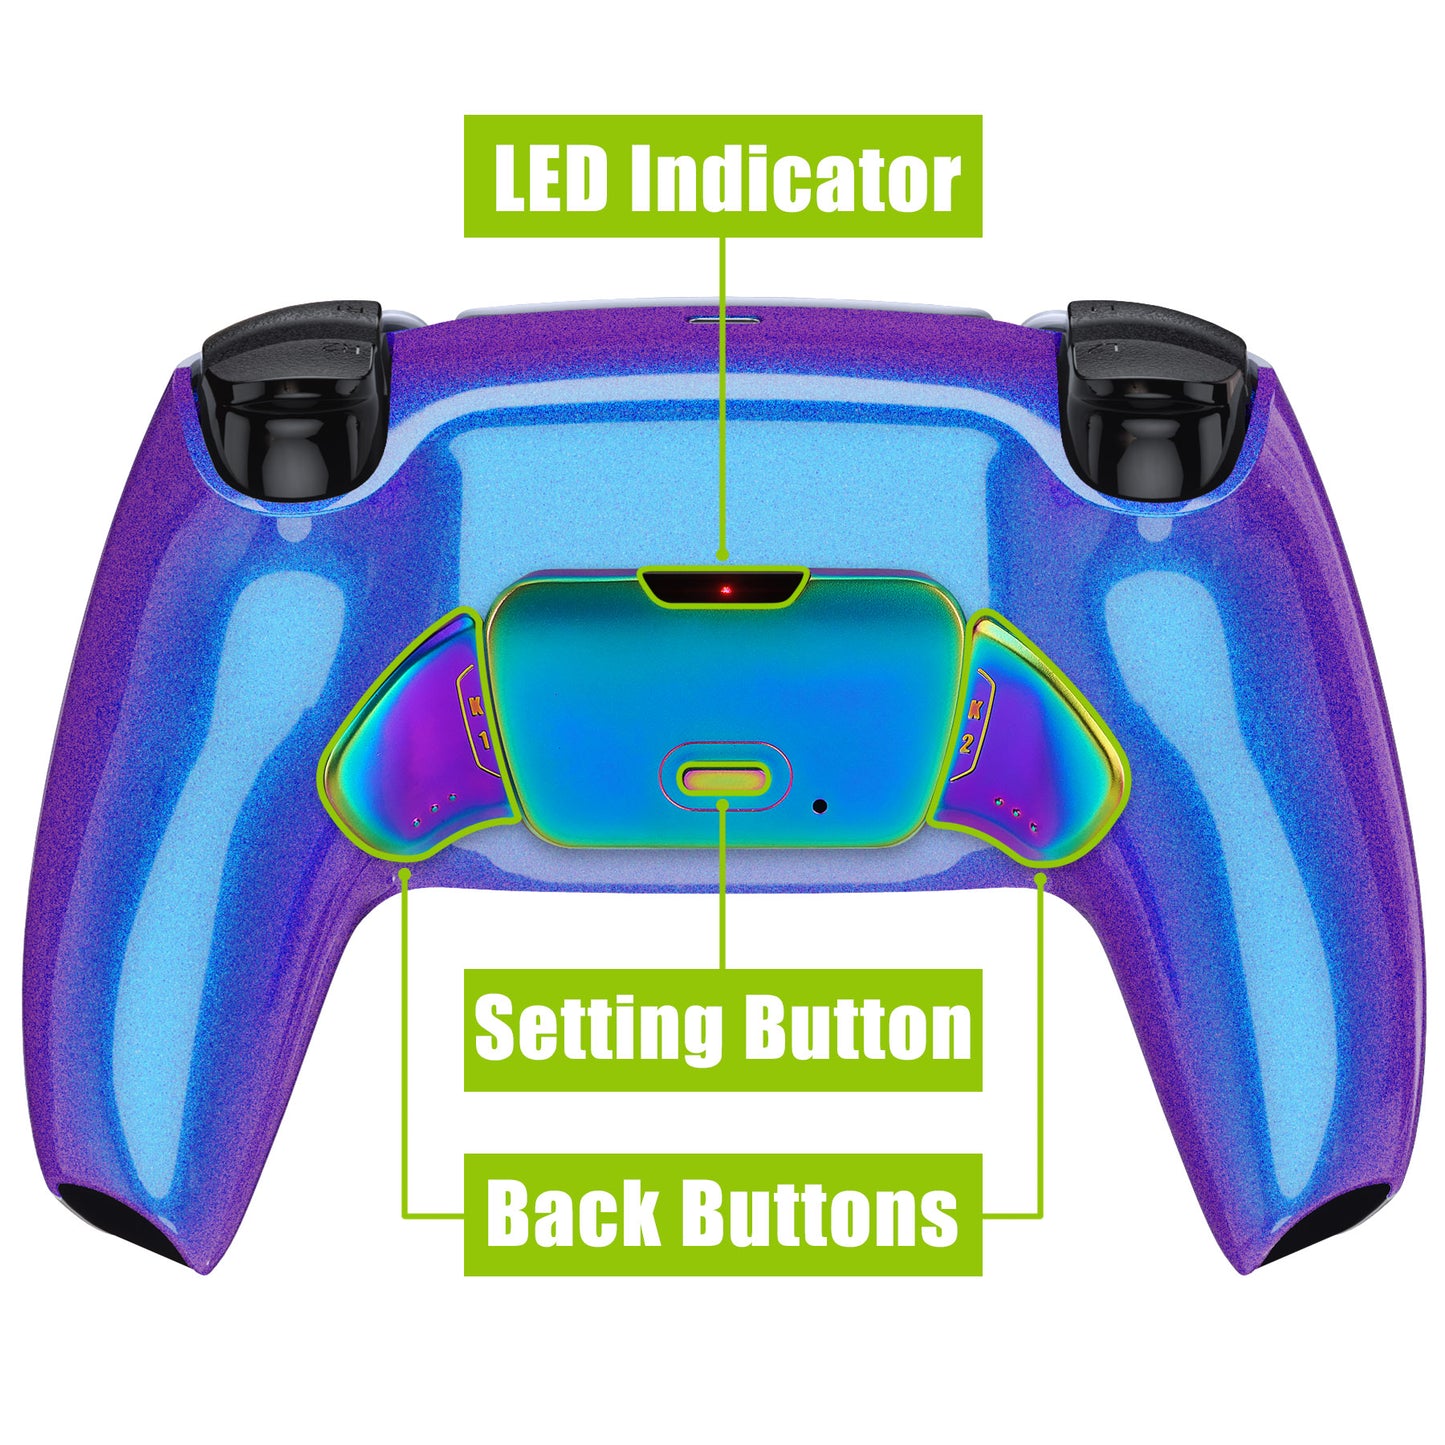 eXtremeRate Rainbow Aura Blue & Purple Real Metal Buttons (RMB) Version RISE Remap Kit for PS5 Controller BDM-030/040 - Chameleon Purple Blue eXtremeRate